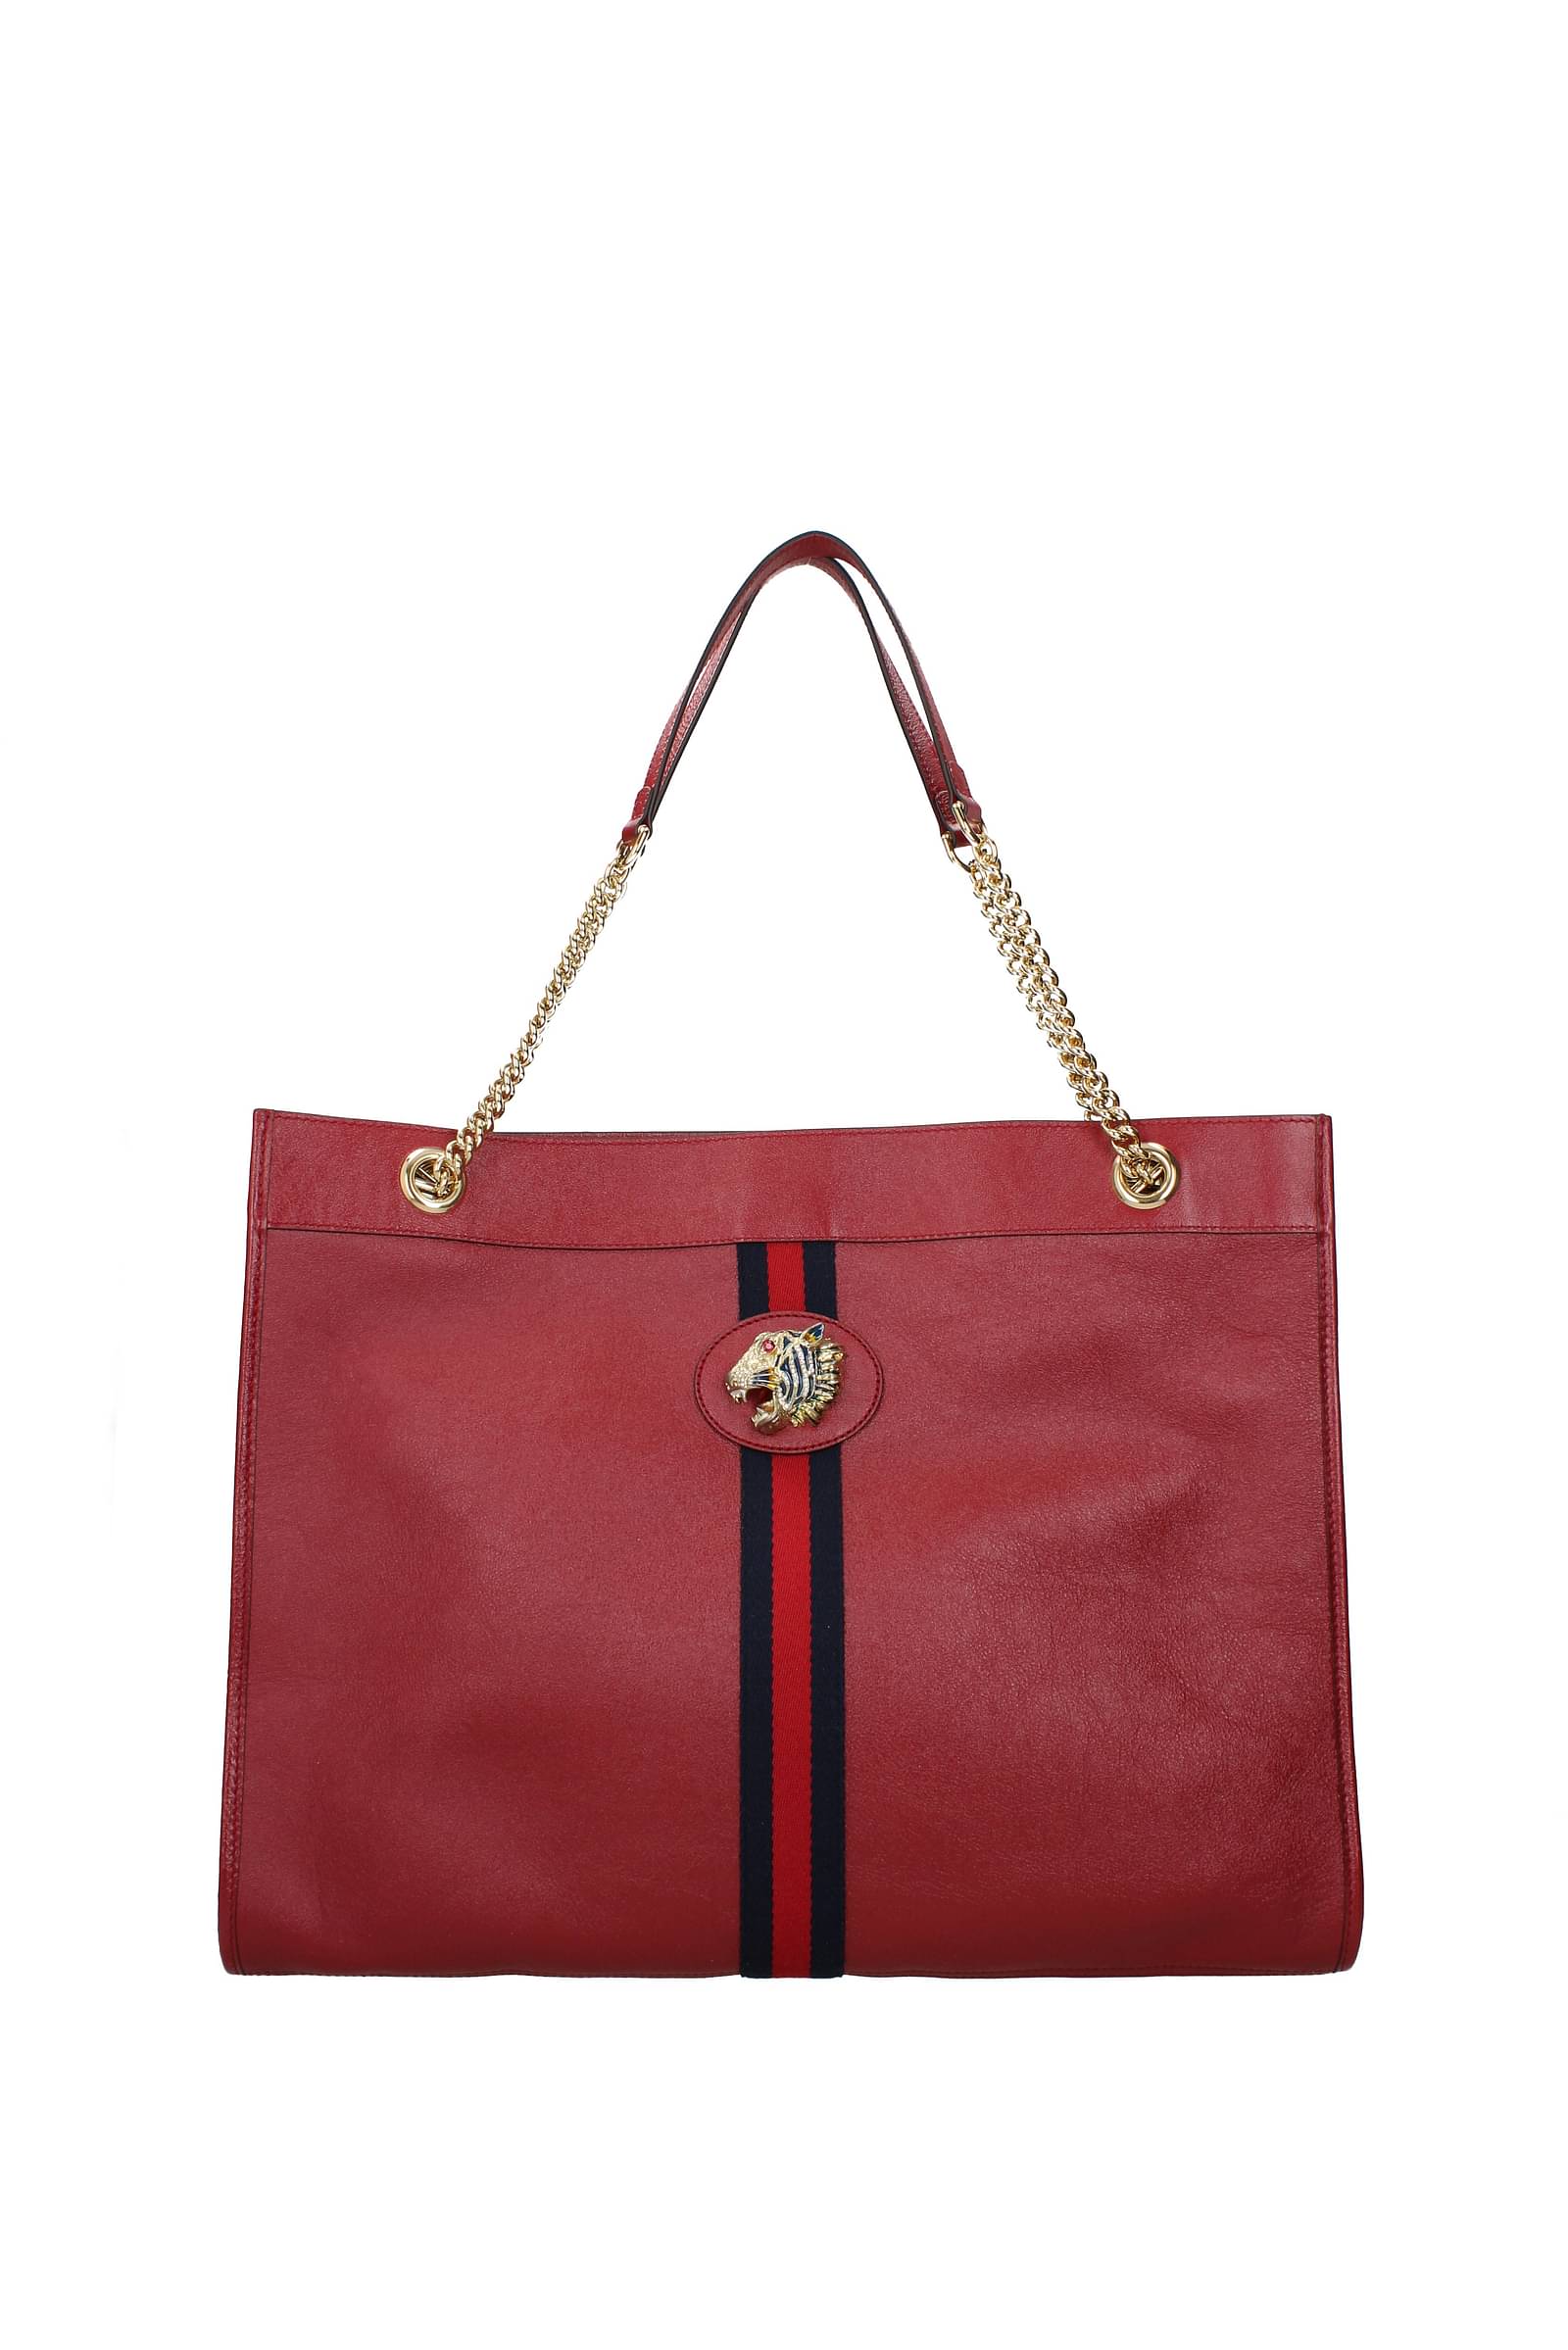 gucci outlet bags online